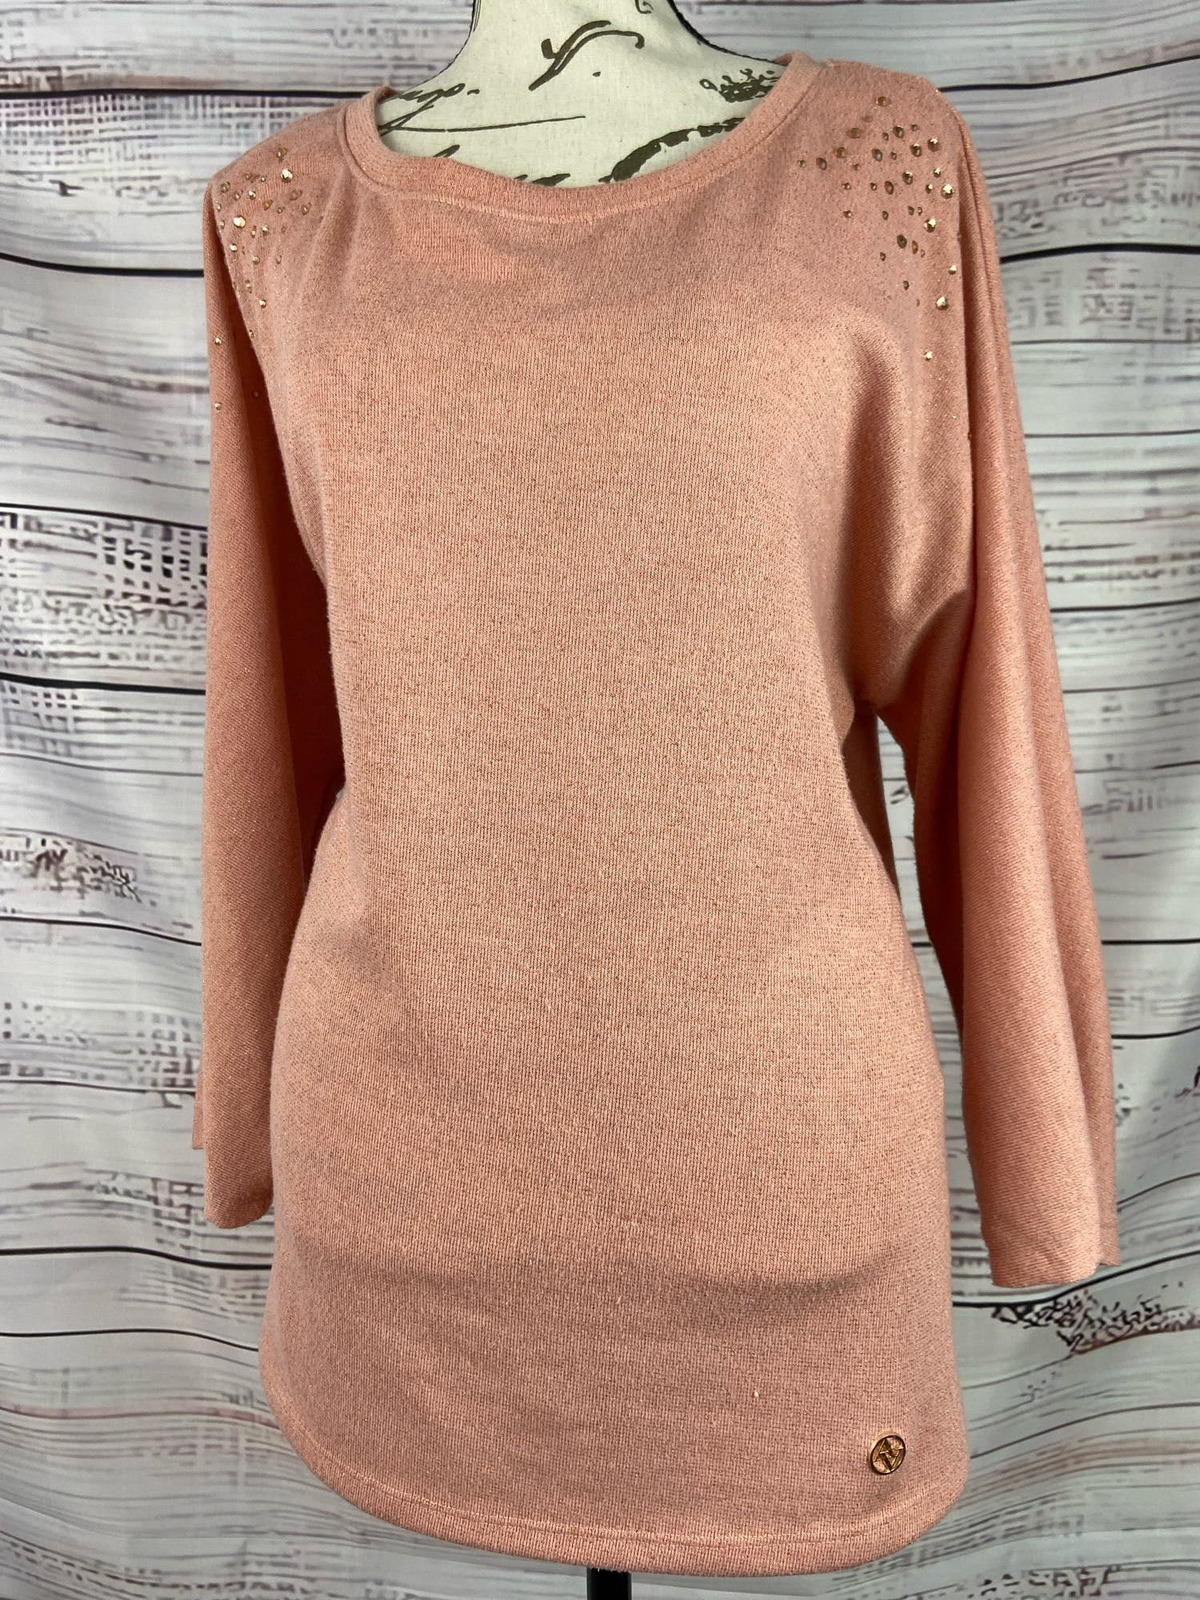 Primary image for Adrienne Vittadini Metallic Embellished Sweater Women XL Soft Stretch Scoop Neck